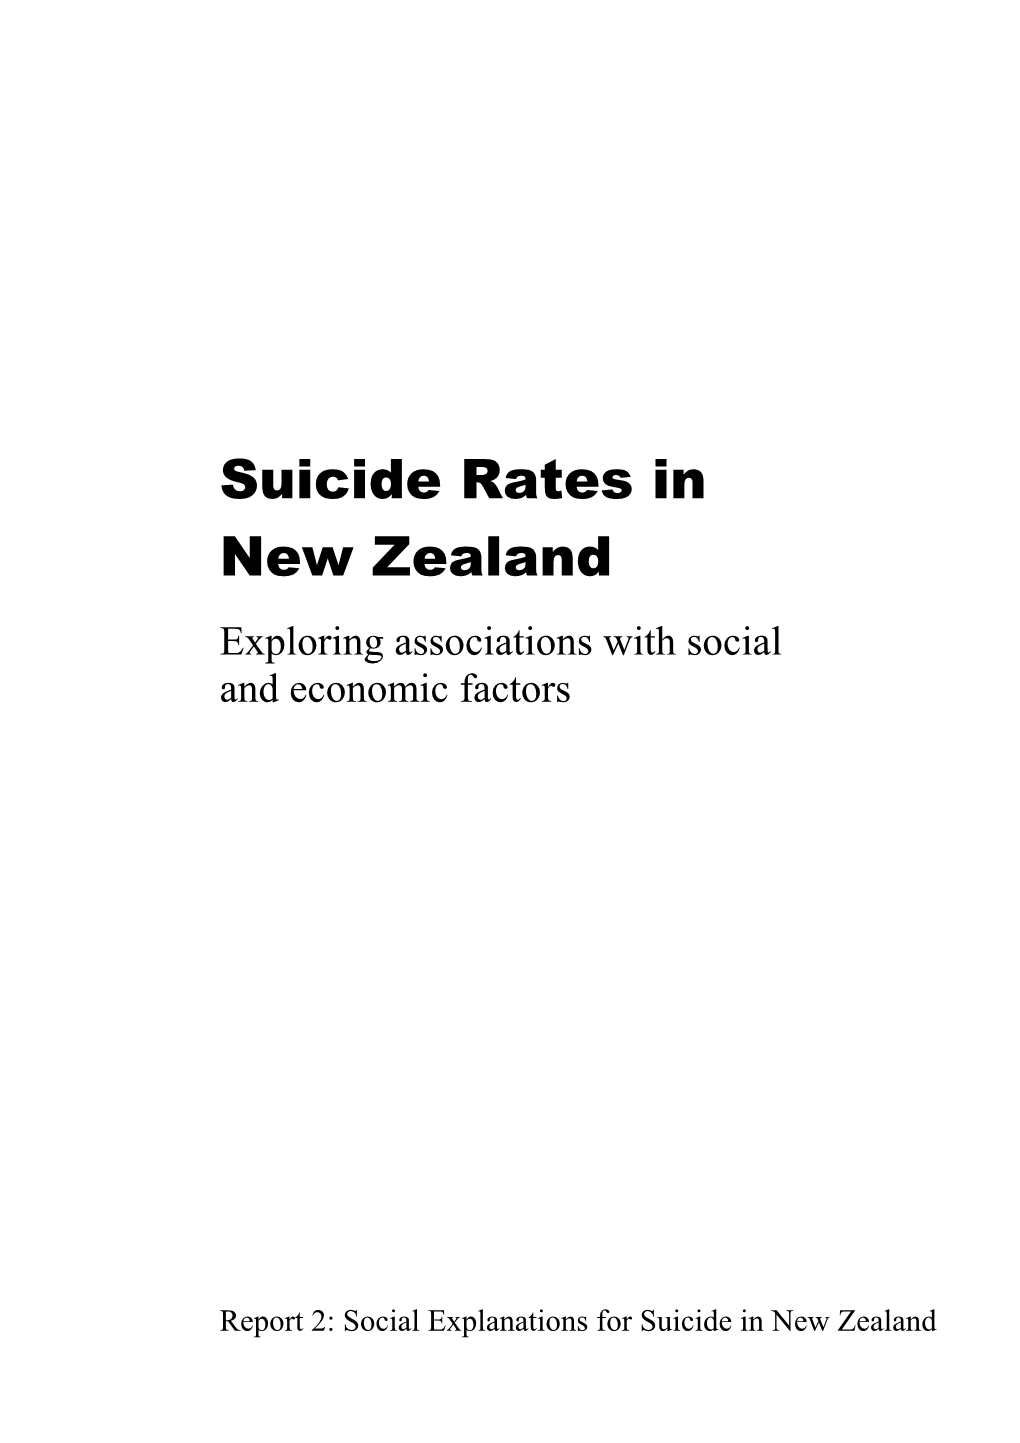 Suicide Rates in New Zealand